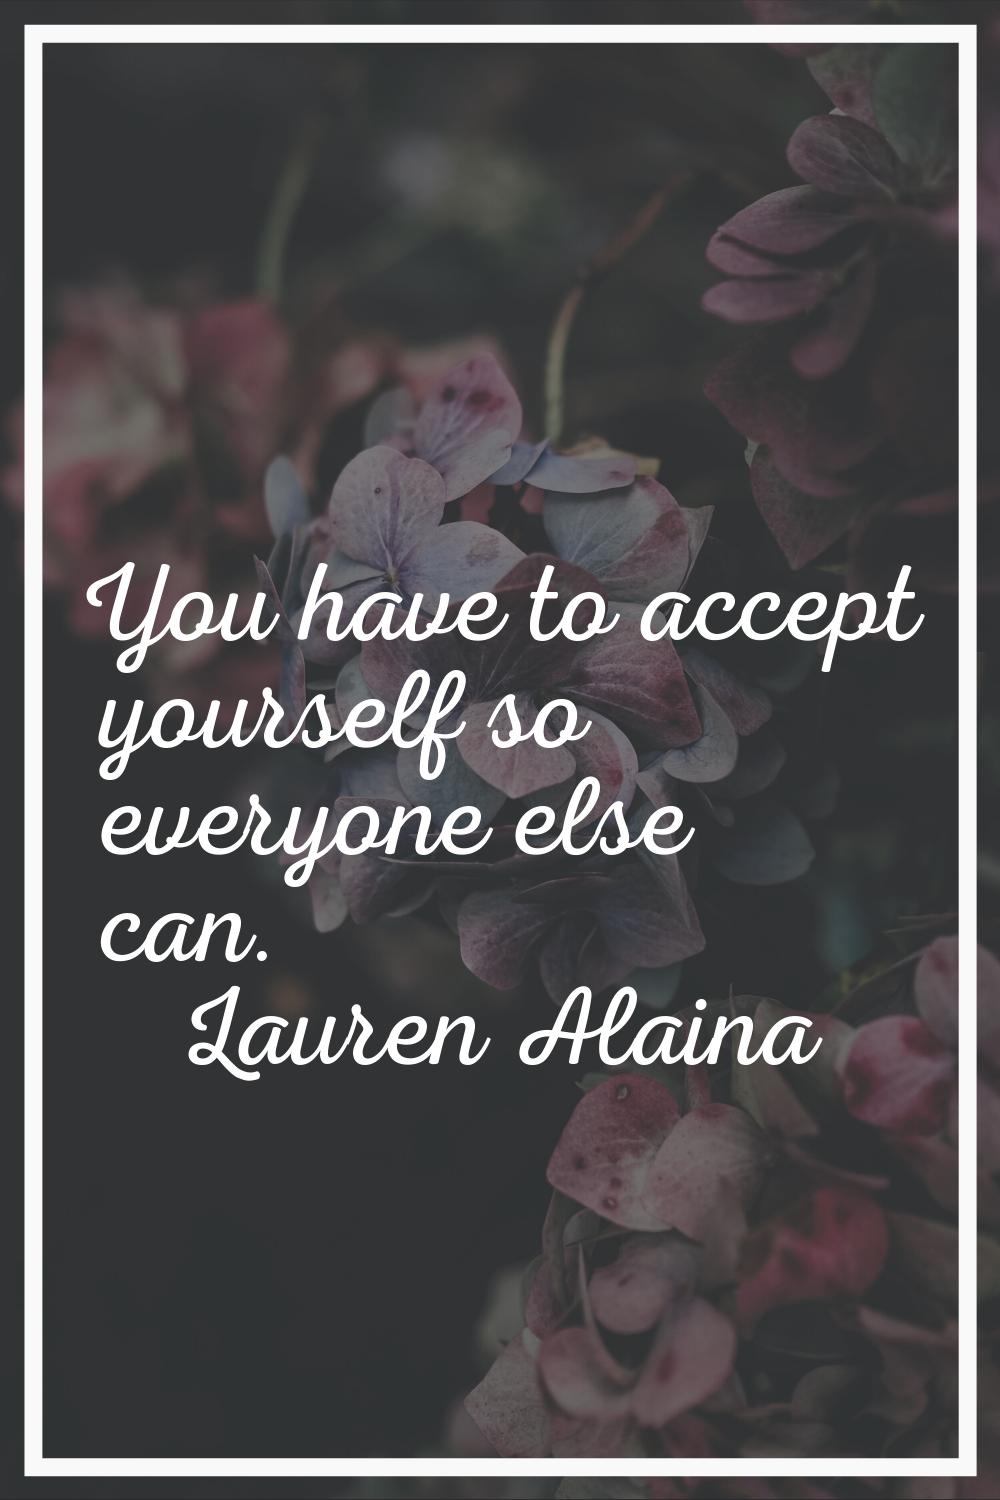 You have to accept yourself so everyone else can.